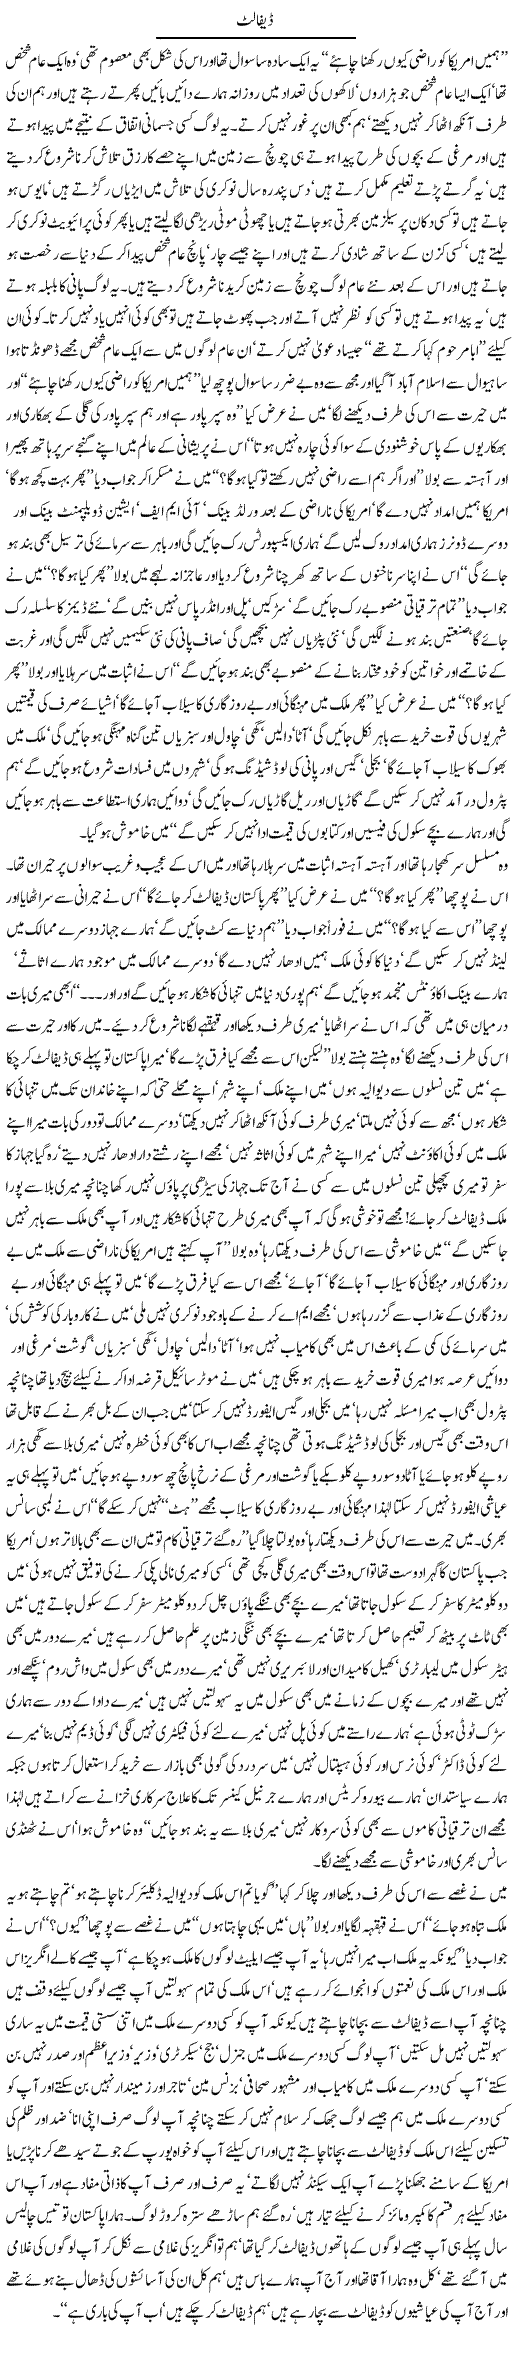 Slavery of America Express Column Javed Chaudhry 10 March 2011